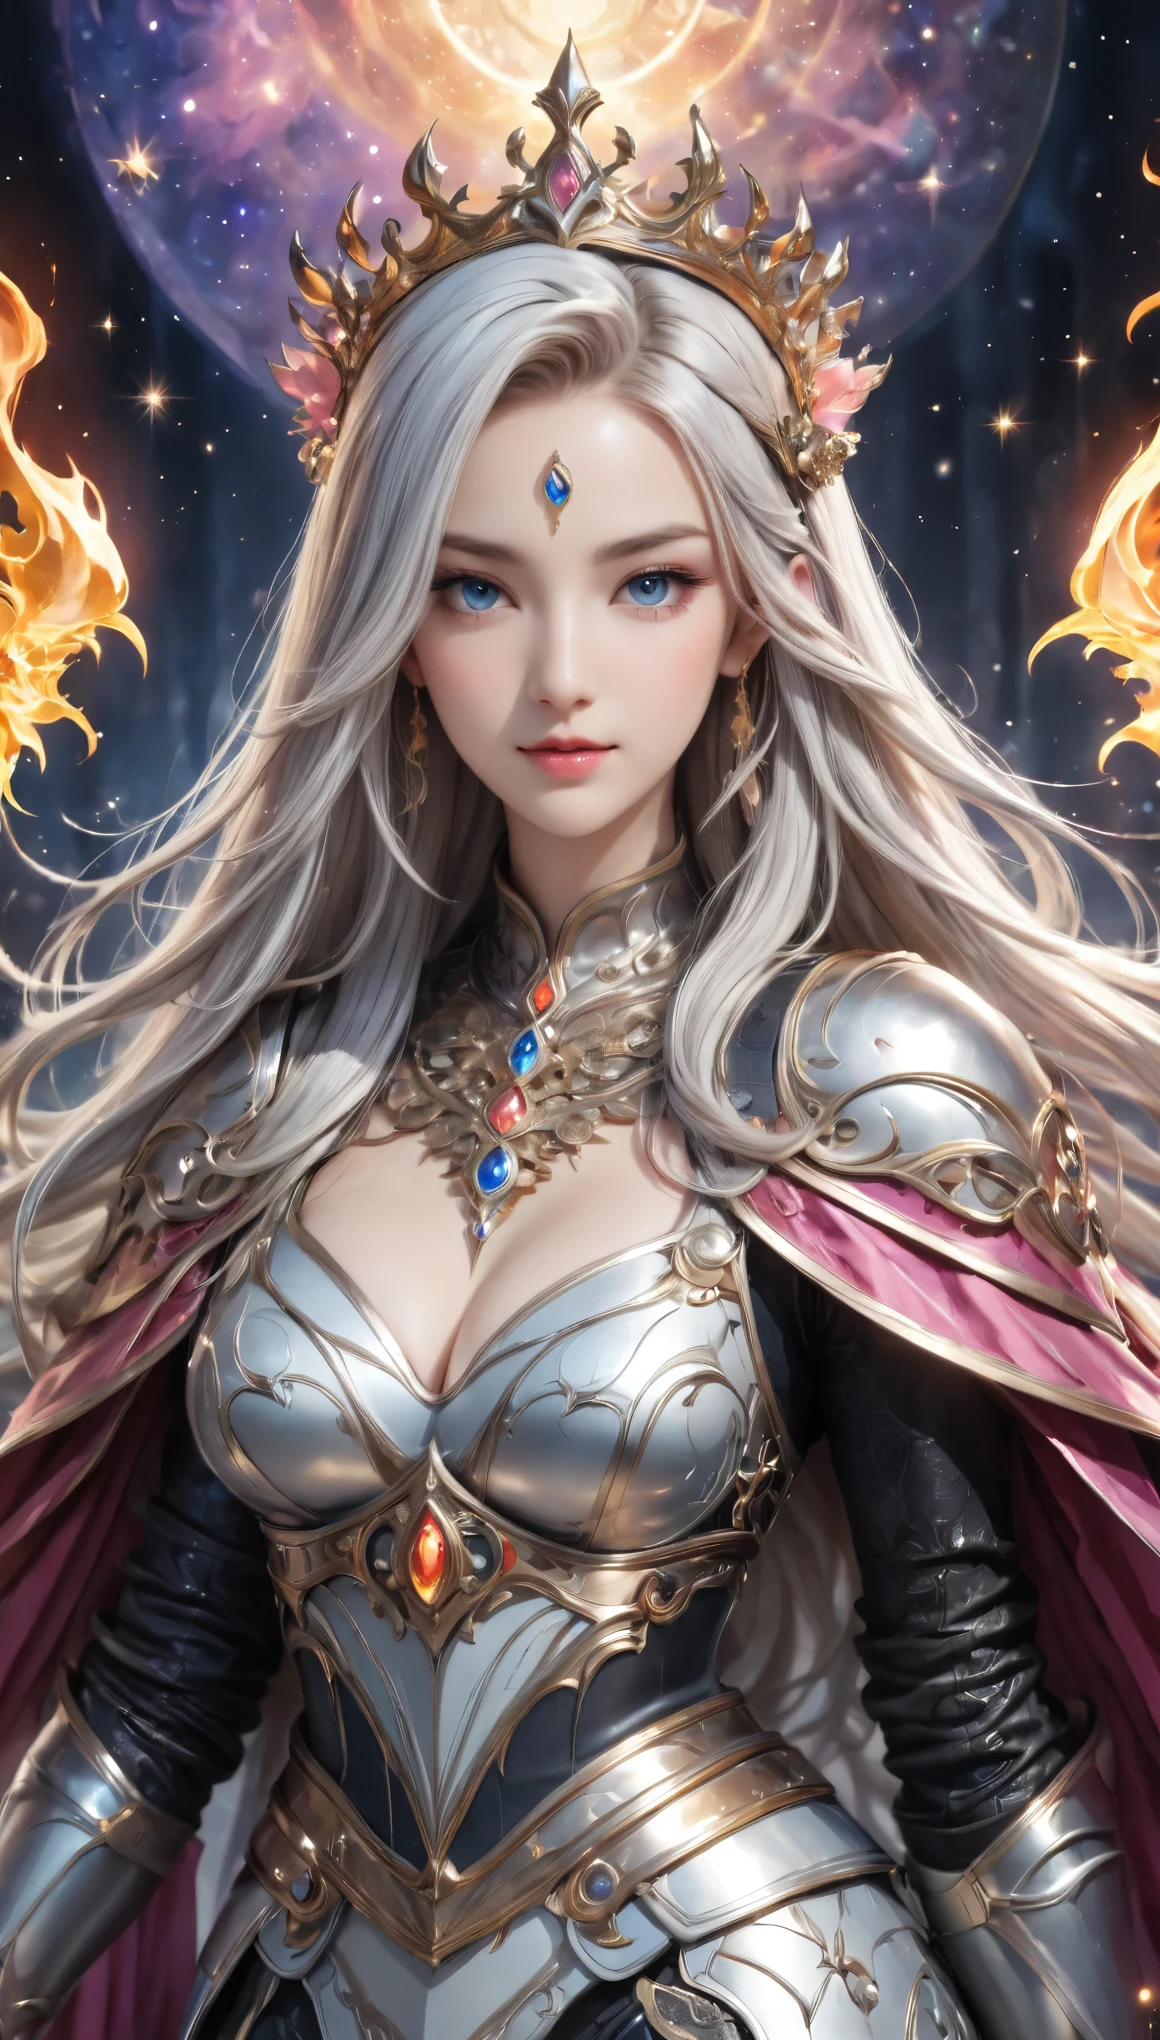 8K resolution, masterpiece, Highest quality, Award-winning works, unrealistic, From above, erotic, sole sexy lady, healthy shaped body, 22 years old, black mage, 165cm tall, huge firm bouncing busts,, white silver long wavy hair, Detailed facial depictions, BREAK, Mysterious blue eyes, Standard nose, Eyeliner, pink lips, sexy long legs, Clear skin, knight, Gothic armor, Complex structure of armor, Seven-colored colorful armor, Clothed in flames, Phoenix Crest, elegant, Very detailed, Delicate depiction of hair, miniature painting, Digital Painting, artstation concept art, Smooth, Sharp focus, shape, Art Jam、Greg Rutkowski、Alphonse Mucha's、William Adolphe Bouguereau、art：Stephanie Law , Royal Jewel, nature, Symmetric, Greg Rutkowski, Charlie Bowwater, Unreal, surreal, Dynamic Lighting, Fantasy art, Complex colors, Colorful magic circle, flash, dynamic sexy poses, A kind smile, Mysterious Background, Aura, A gentle gaze, BREAK, Small faint lights and flying fireflies, night, lanthanum, From above, looking down on the world below, Starry Sky, milky way, nebula, shooting star, God in the right hand々A sword that emits a brilliant light, Back view, Looking back towards the camera,